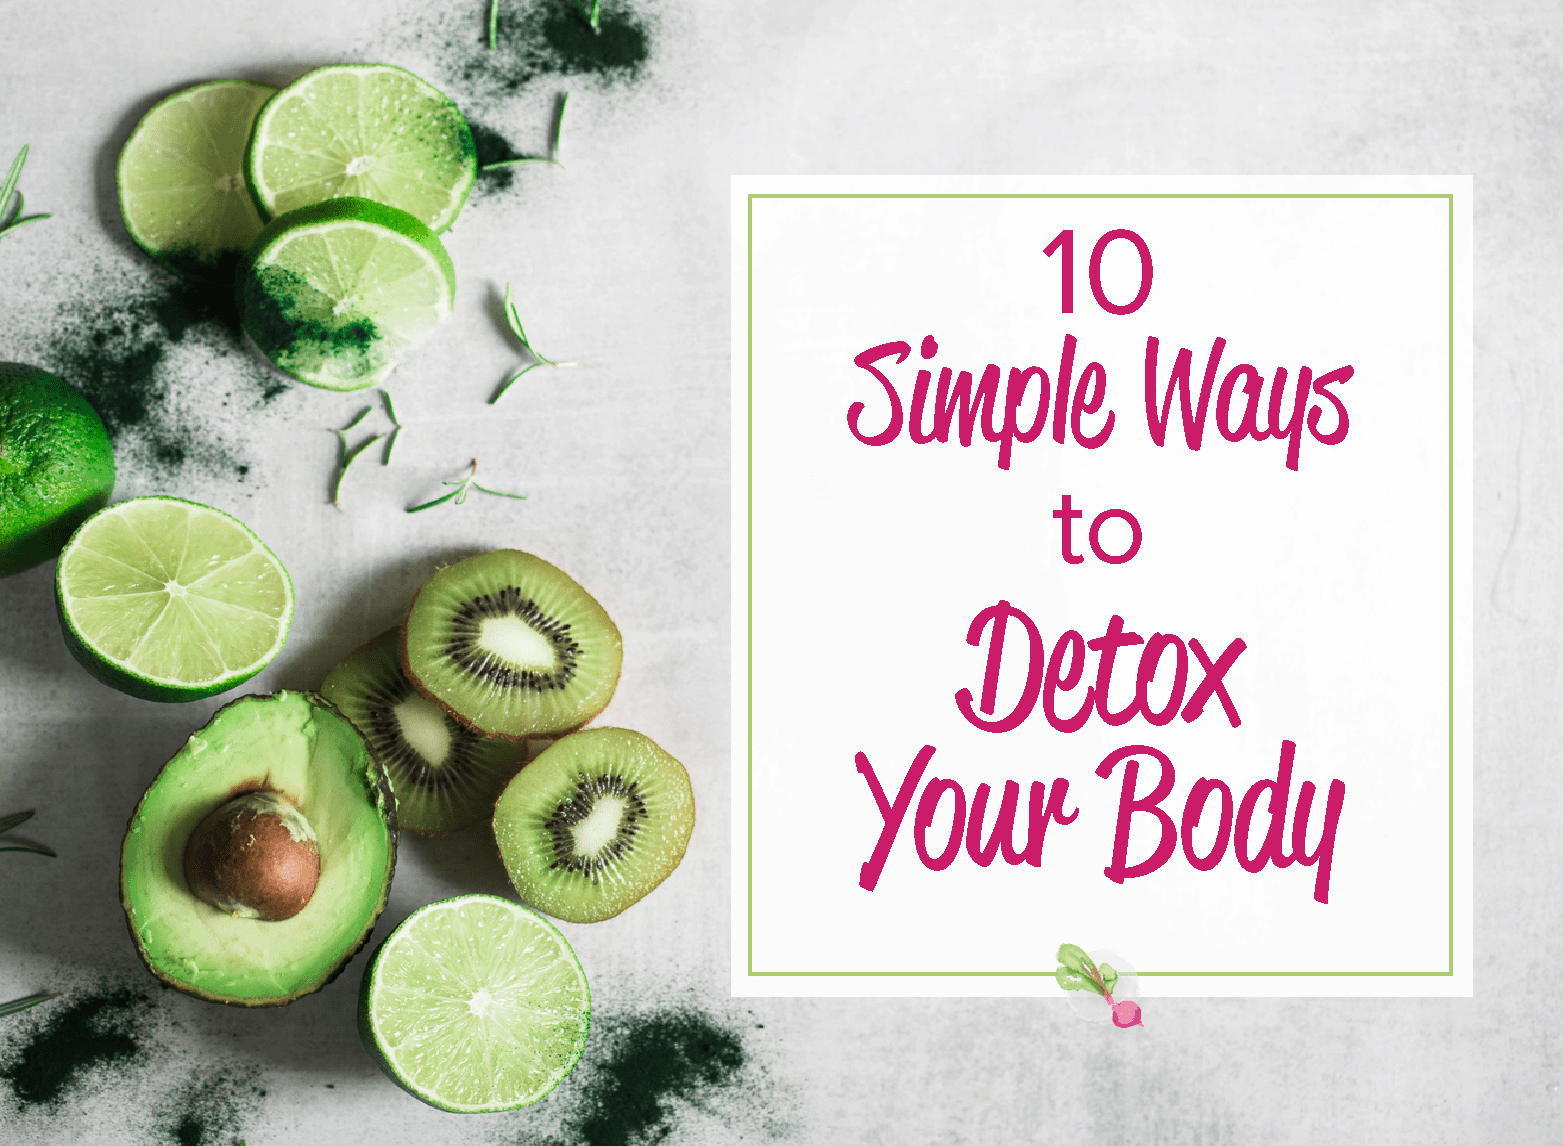 A detox doesn't have to be depressing! Here are 10 simple ways to detox your body.